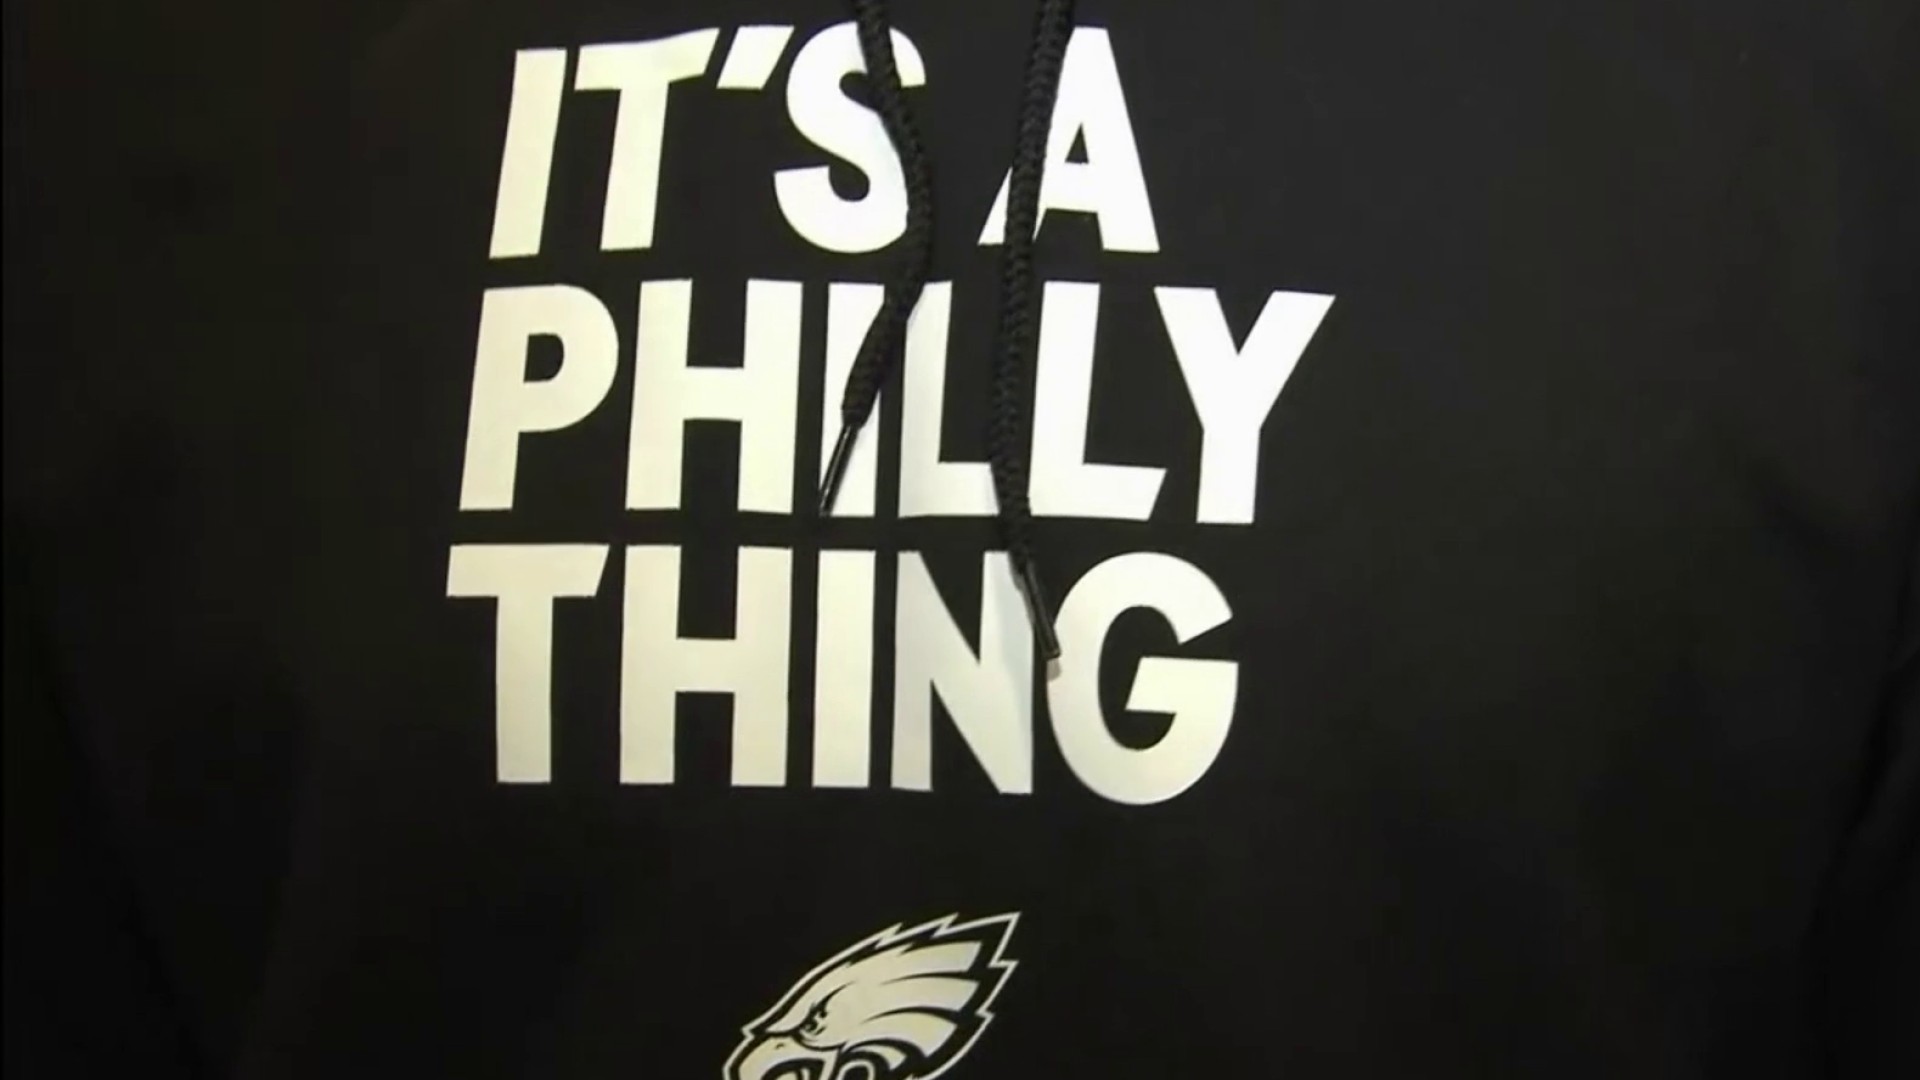 Brotherly Shove Win Its A Philly Thing Philadelphia Eagles Shirt